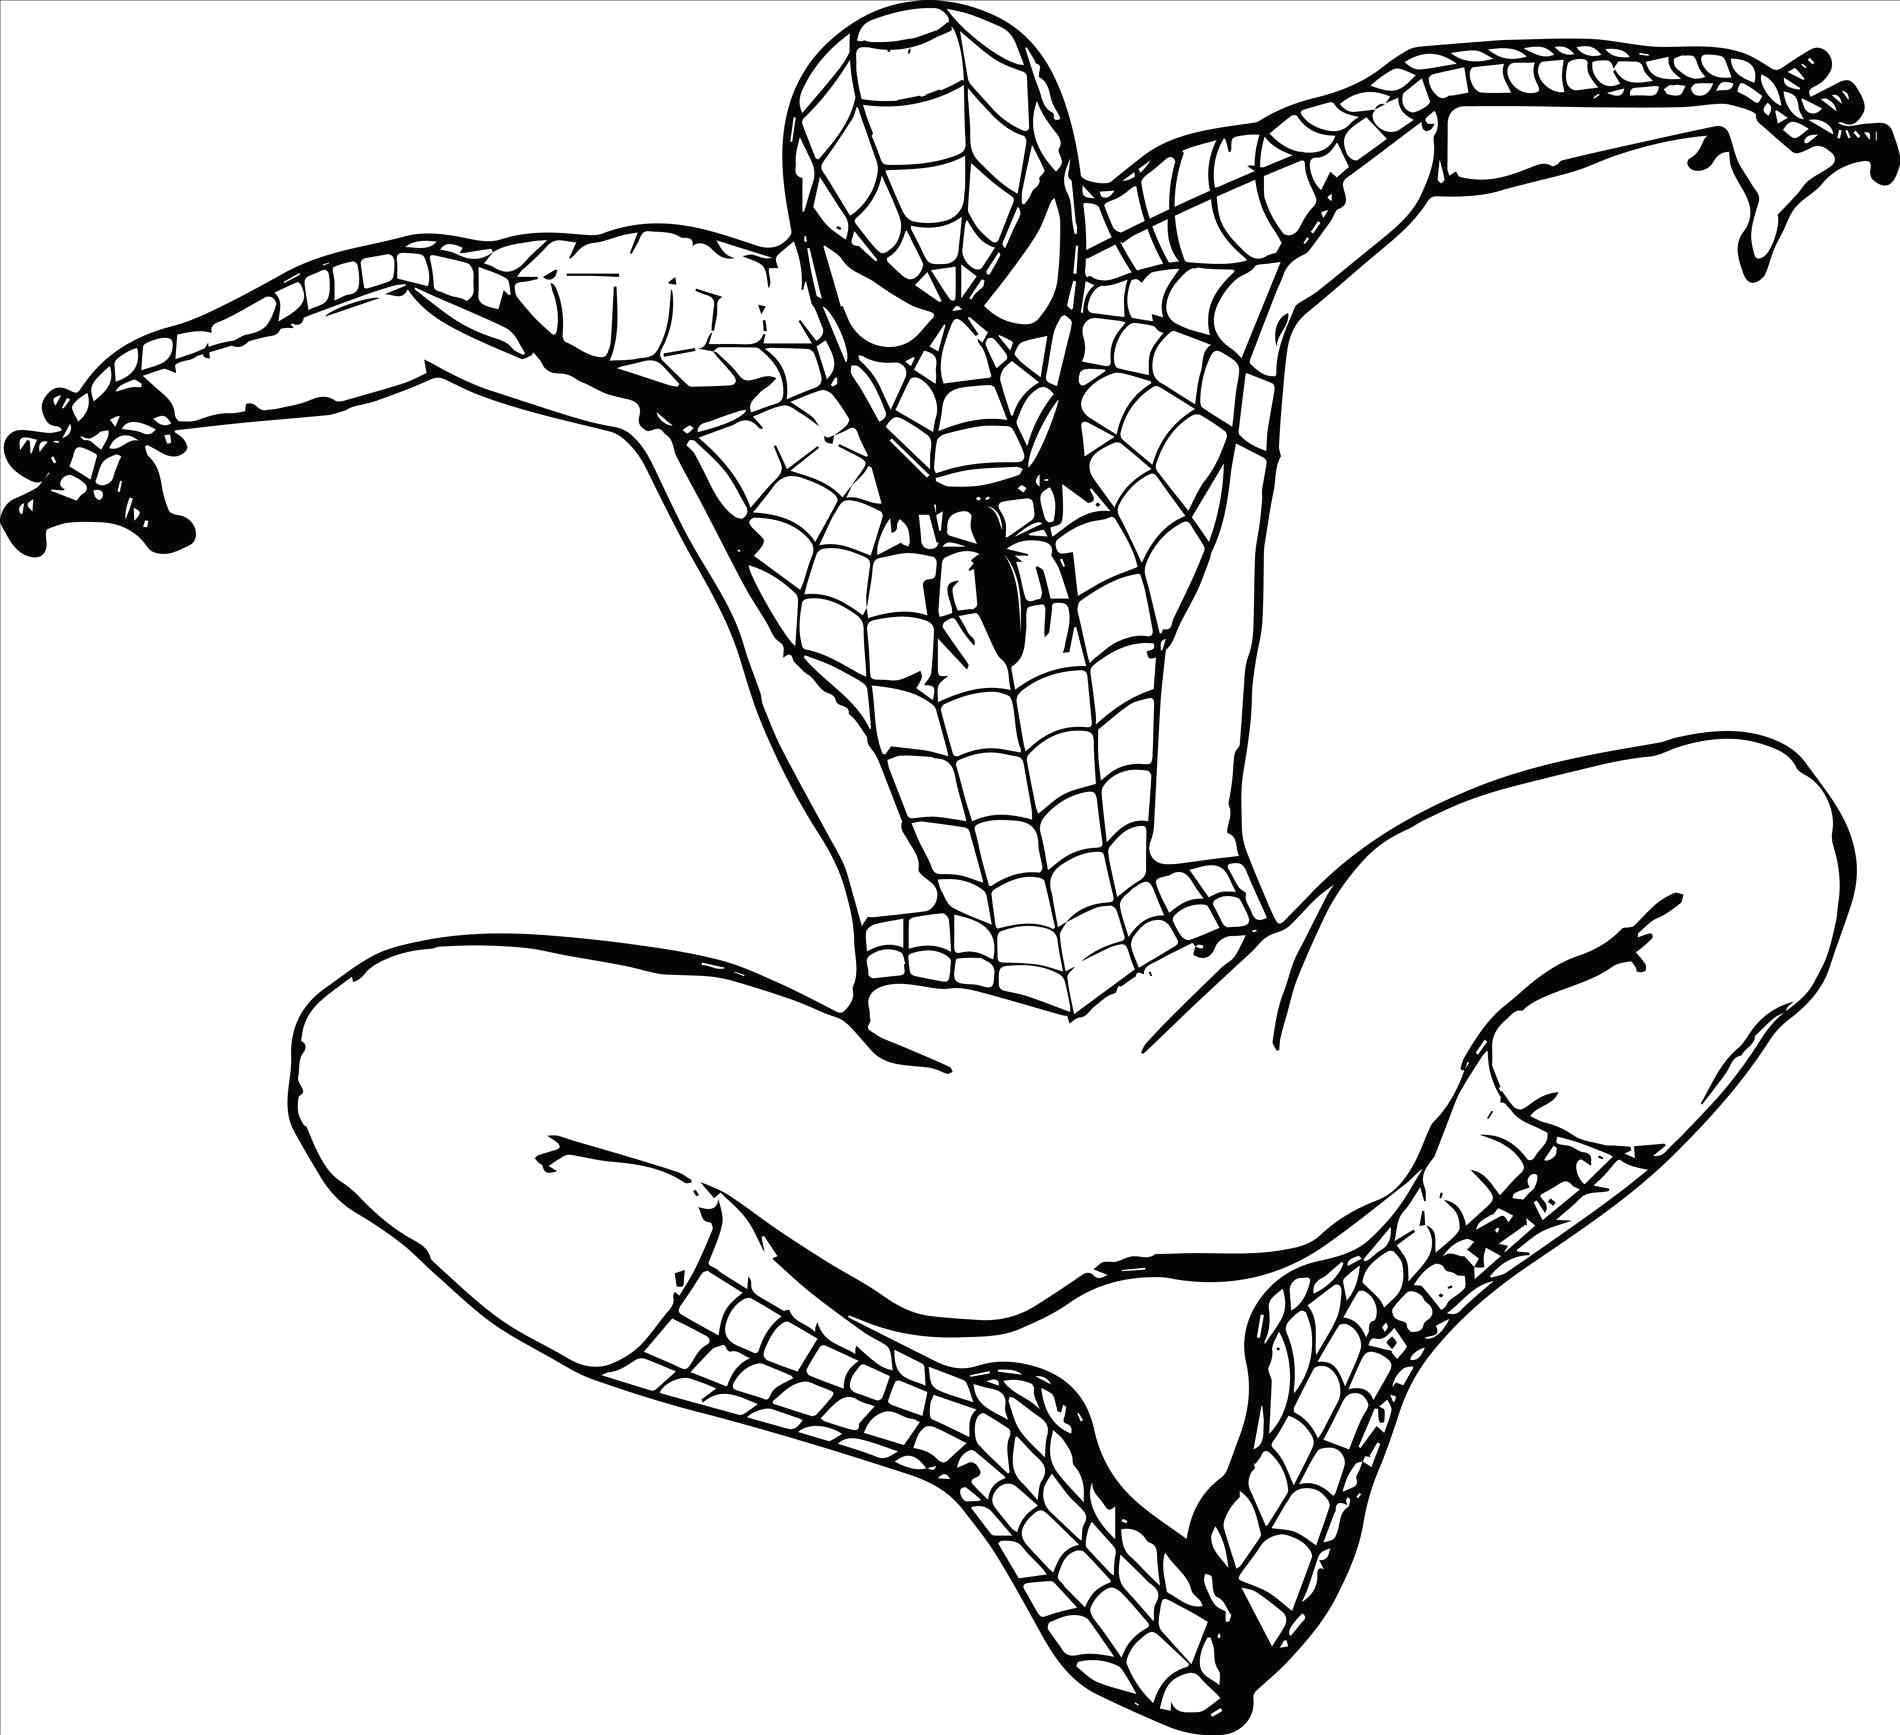 Easy Drawings Spiderman Superheroes Easy to Draw Spiderman Coloring Pages Luxury 0 0d